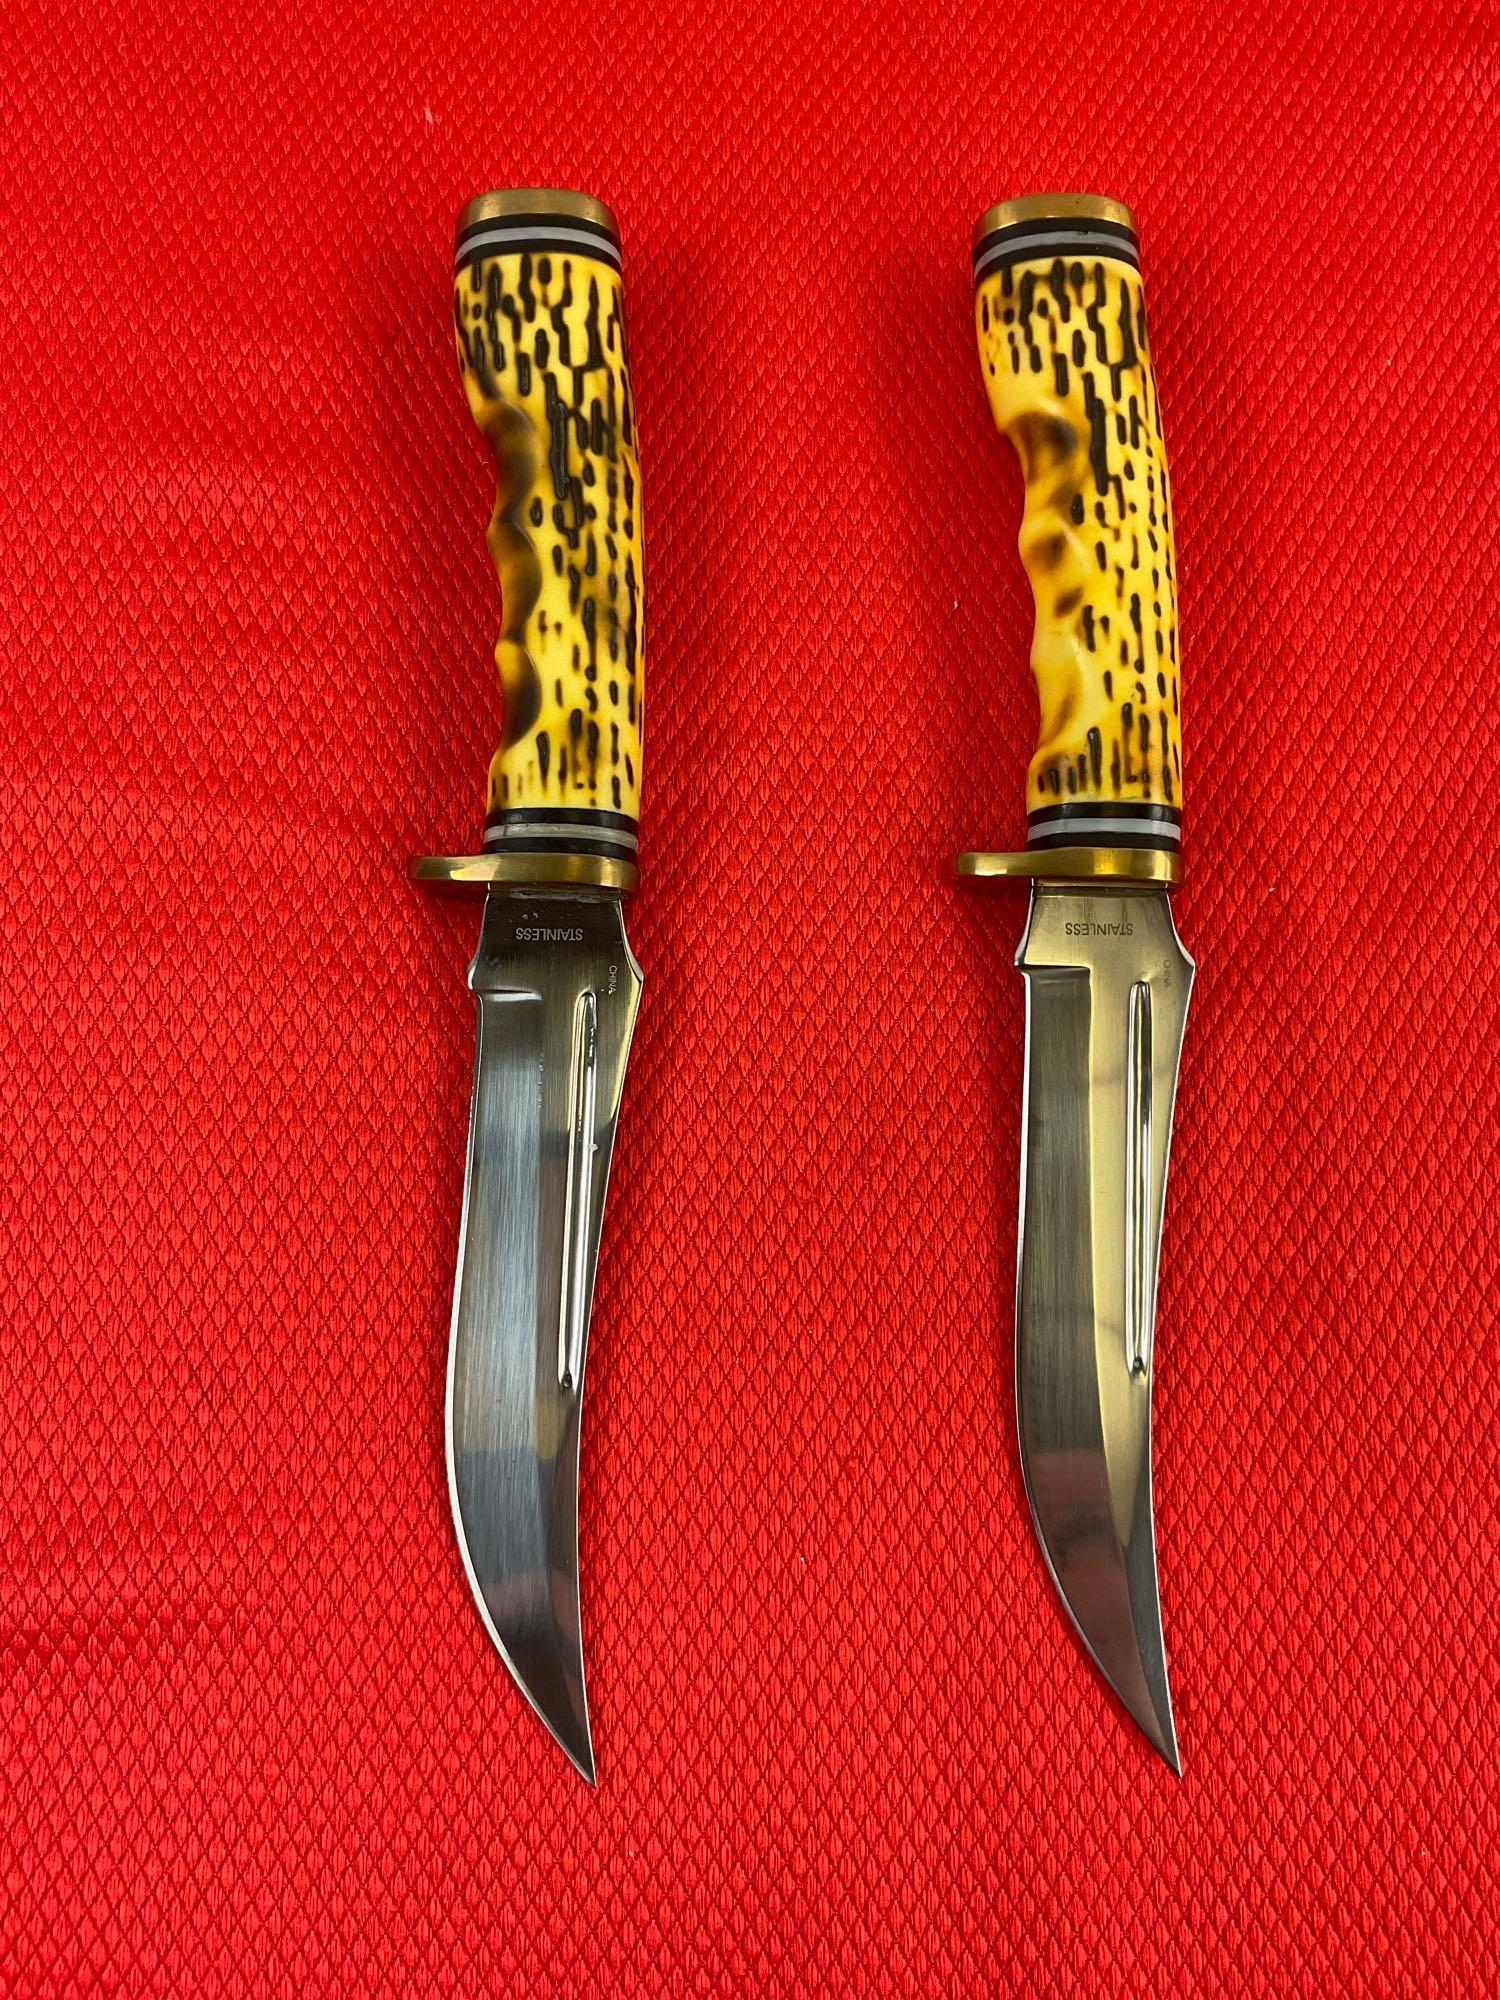 Pair of 5" Stainless Steel Fixed Blade Hunting Knives w/ Faux Antler Handles & Canvas Sheathes. See